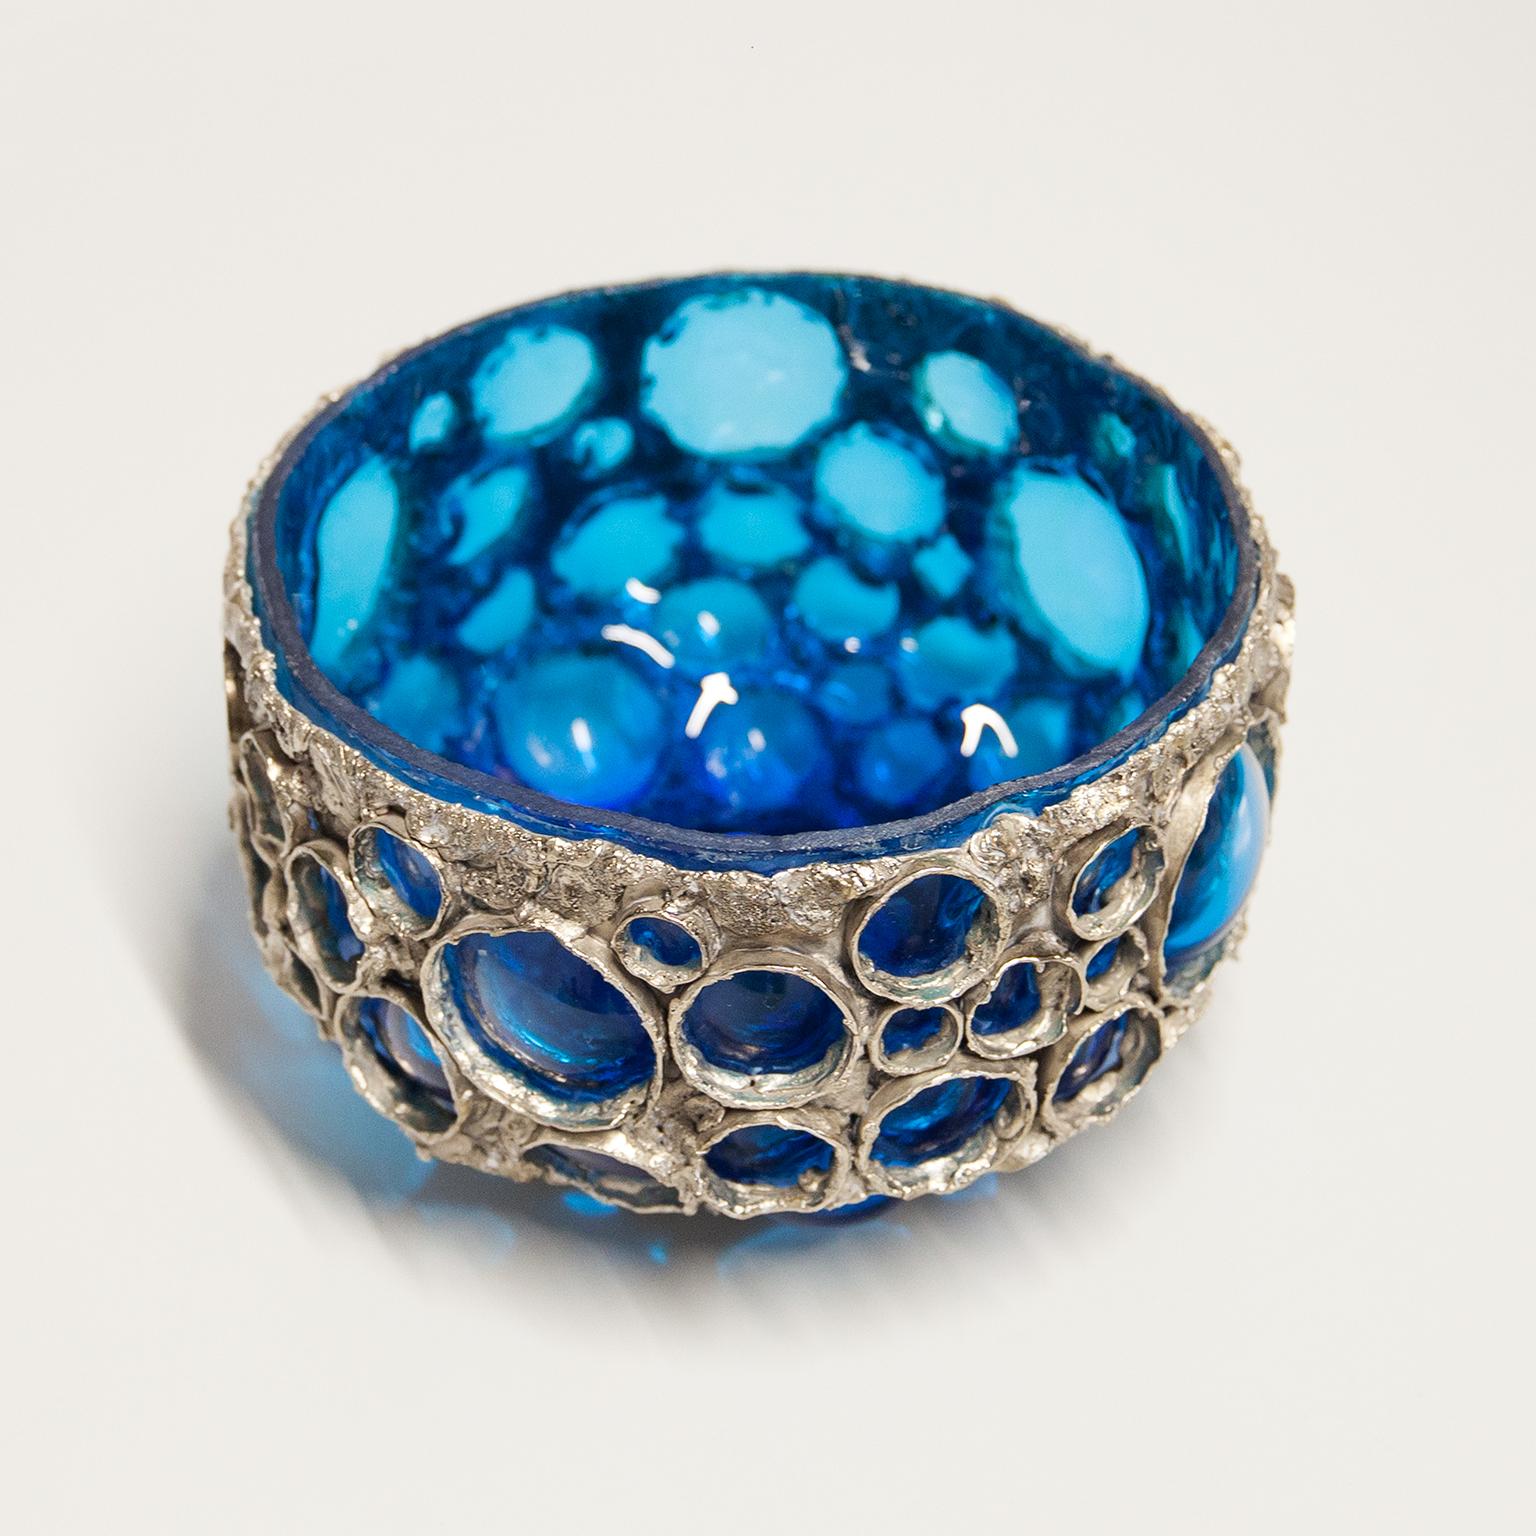 Marcello Fantoni and Gian Paolo blown glass and fused metal bowl, having an organic round form executed in blue glass with cold painted metal accents, signed on underside.